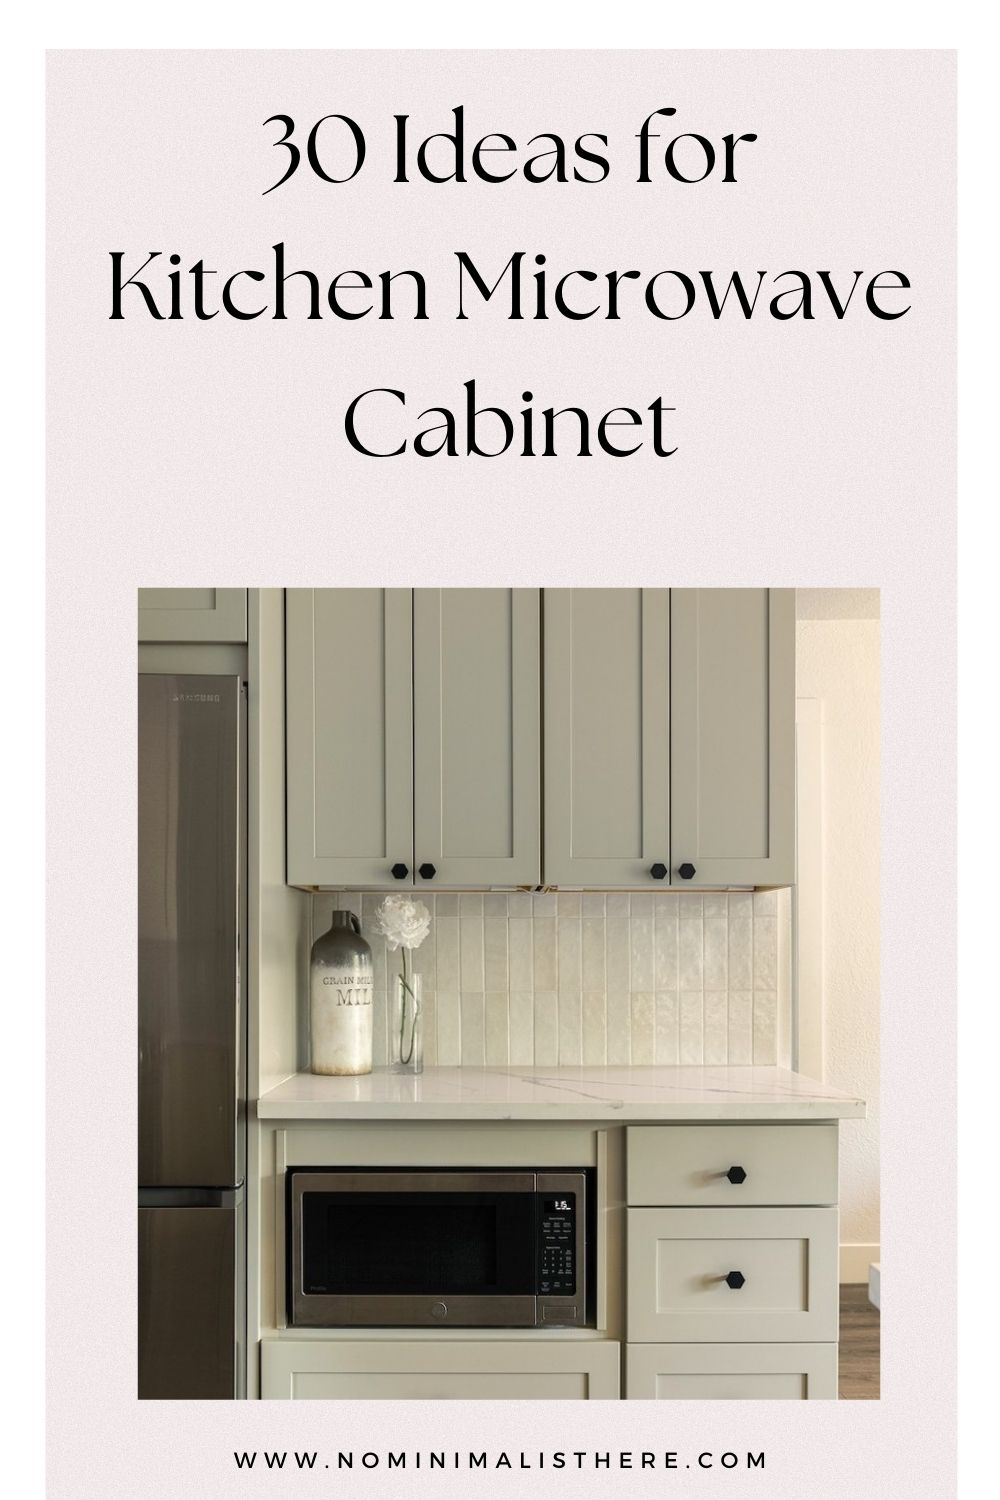 pinterest image for an article about kitchen microwave cabinets